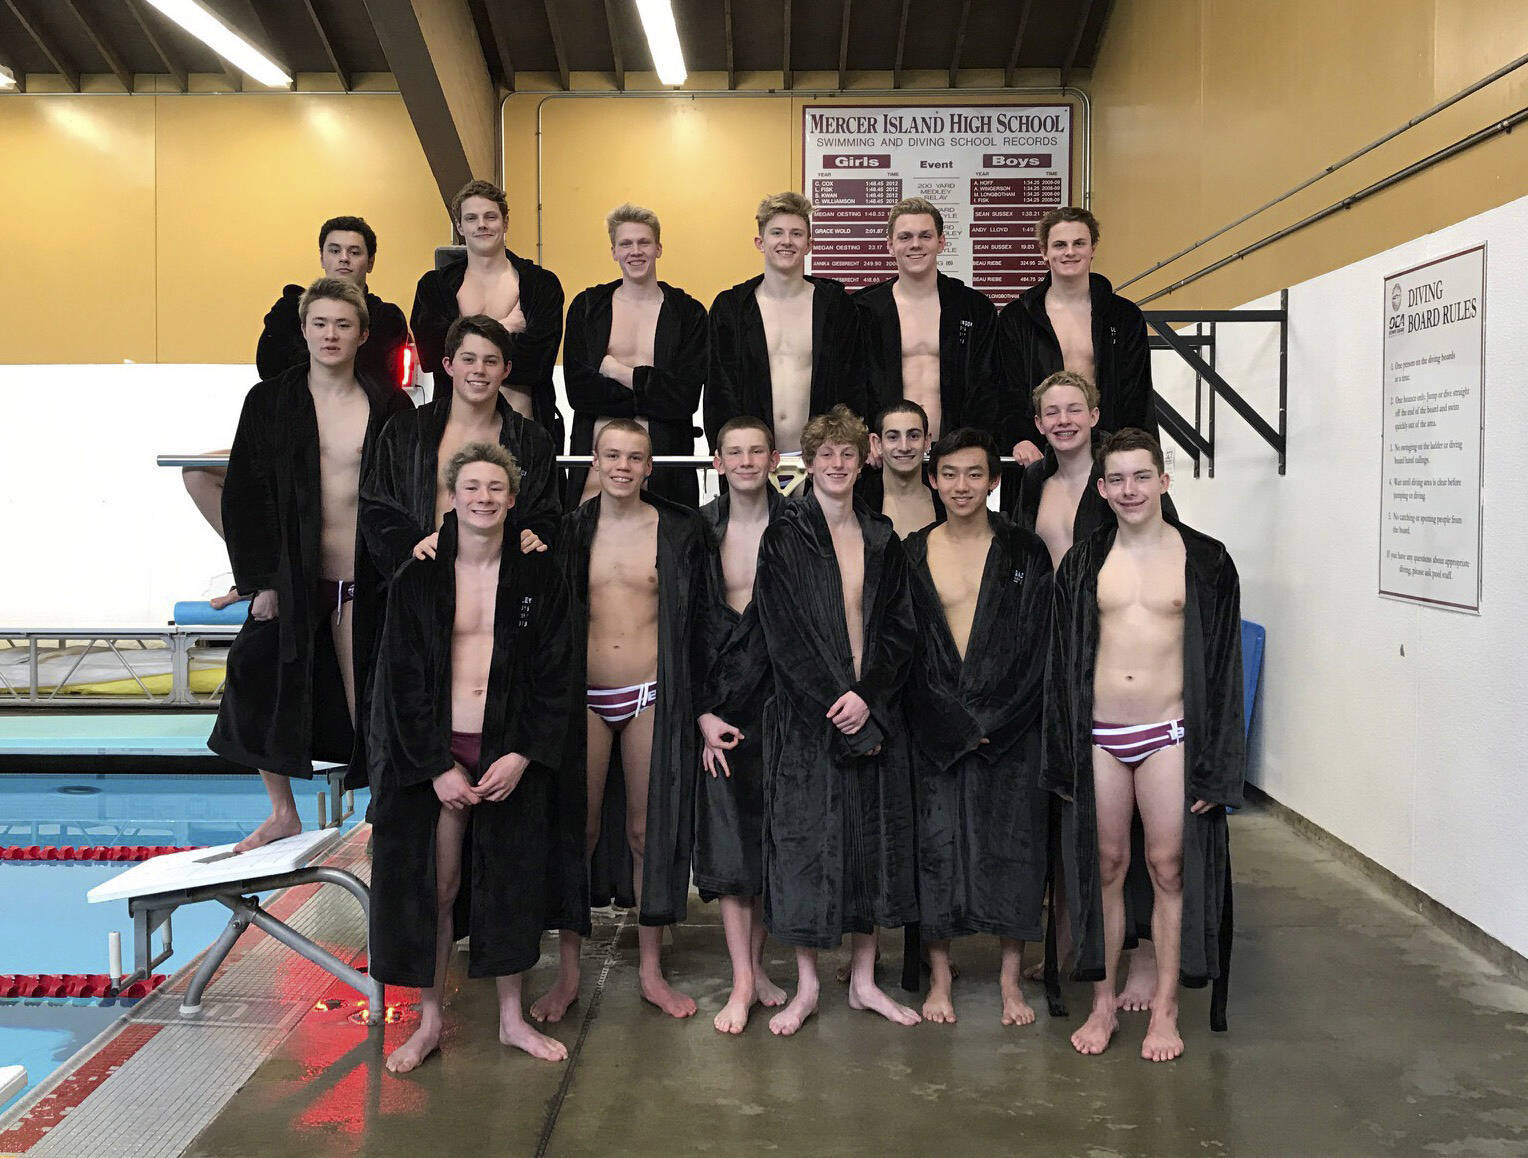 Photo courtesy of Amy Shobe                                The Mercer Island boys swim team captured second place at the Class 3A state swim and dive meet on Feb. 17 at the King County Aquatic Center in Federal Way. The Islanders, who compiled a total of 374 team points, were just 23 points behind first place Bainbridge Island. Mercer Island athletes that competed at the state meet consisted of Carson Coe, Kyle Bailey, Oliver Hoff, Austin Shobe, Nate Robinson, Evan Hill, James Robertson, Jake Headrick, Killian Riley, Caleb Apodaca, Kieran Watson, Collin Ralston, Ethan Schwartz, Dan Gao, Alex Edwards, John Novak and Gabe Neale.                                The 200 free relay team consisting of Hill, Coe, Riley and Hoff earned first place. The 400 free relay quartet of Richardson, Robinson, Hoff and Riley nabbed second place. The 200 medley relay team of Edwards, Richardson, Coe and Bailey captured second place. Richardson collected individual titles in the 100 fly with a time of 49.84 and the 100 backstroke with a time of 49.78.